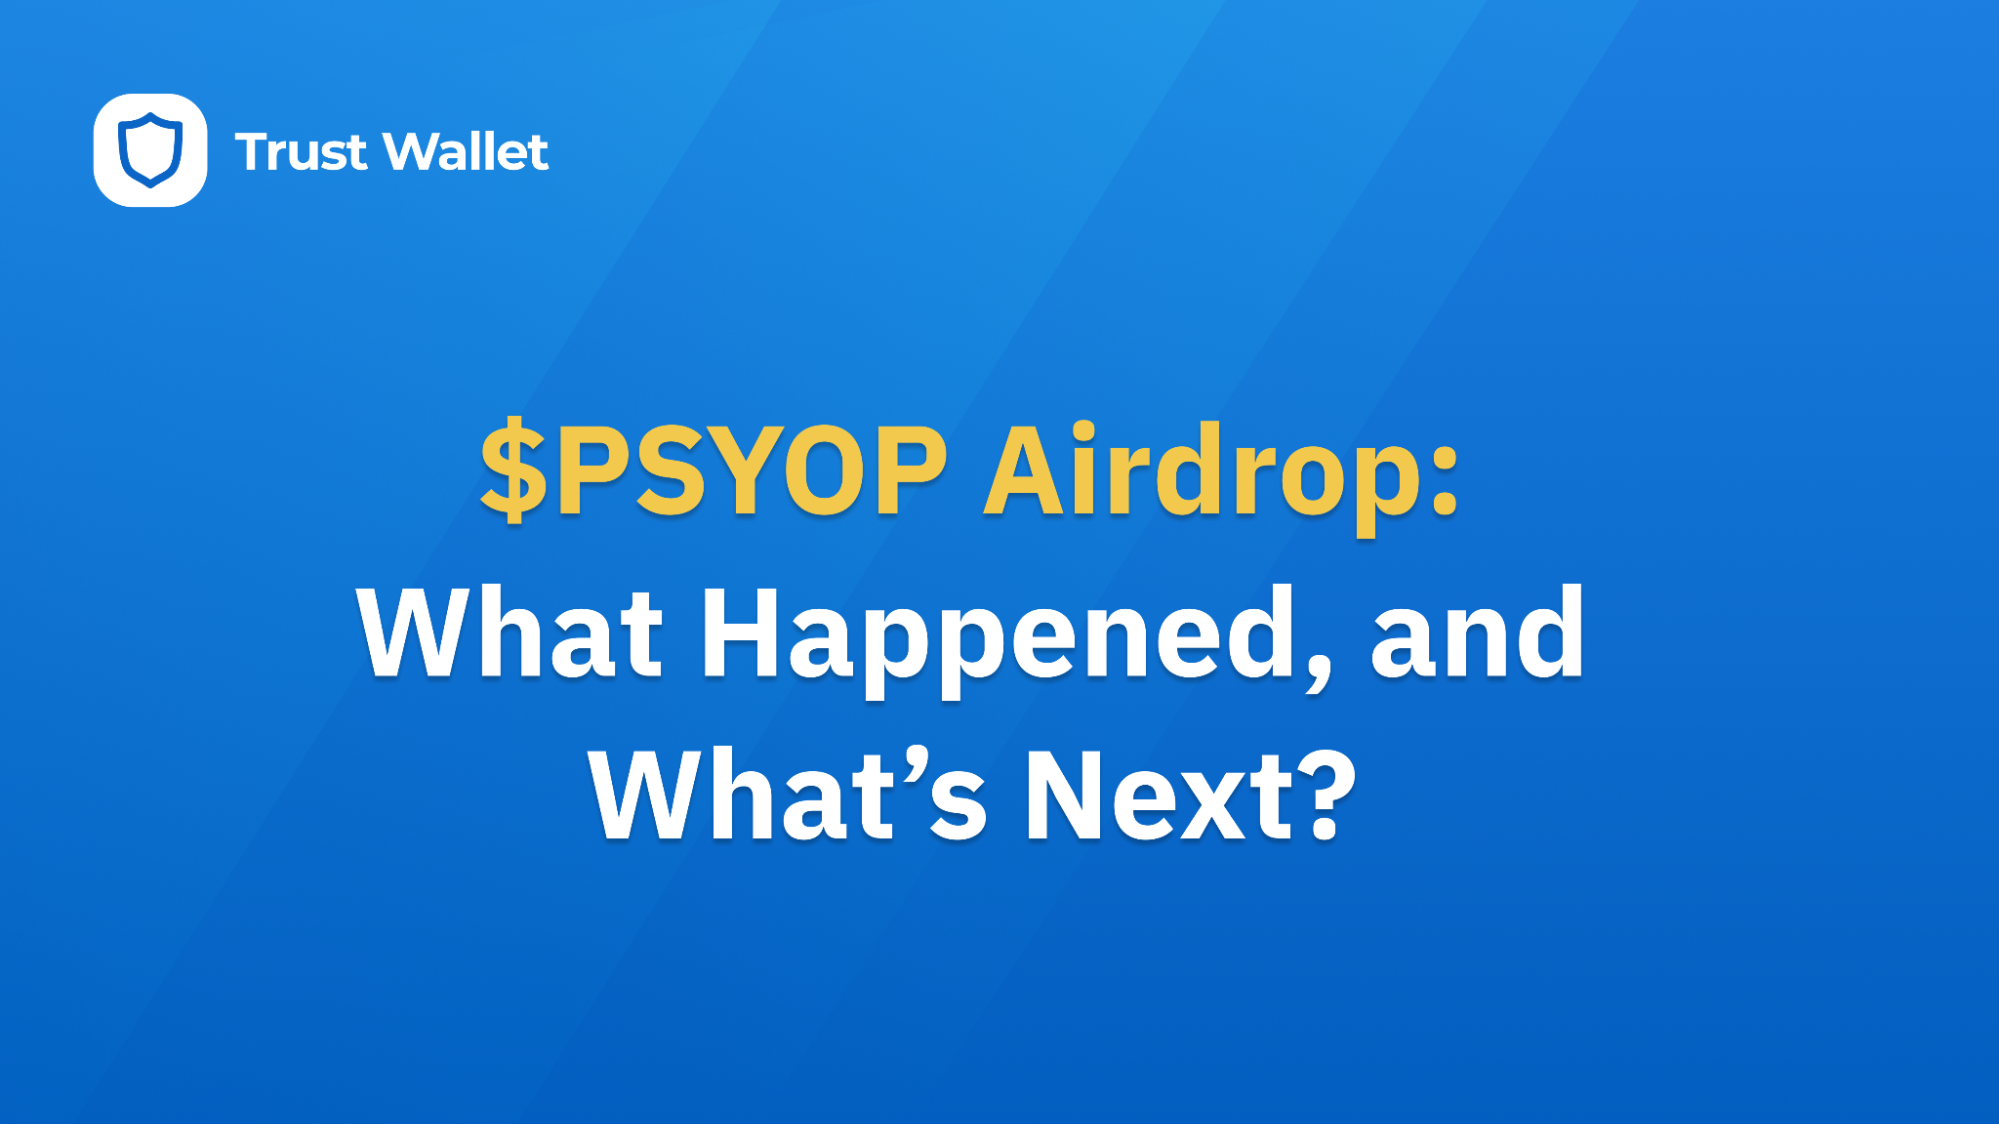 PSYOP Airdrop: What Happened, and What's Next